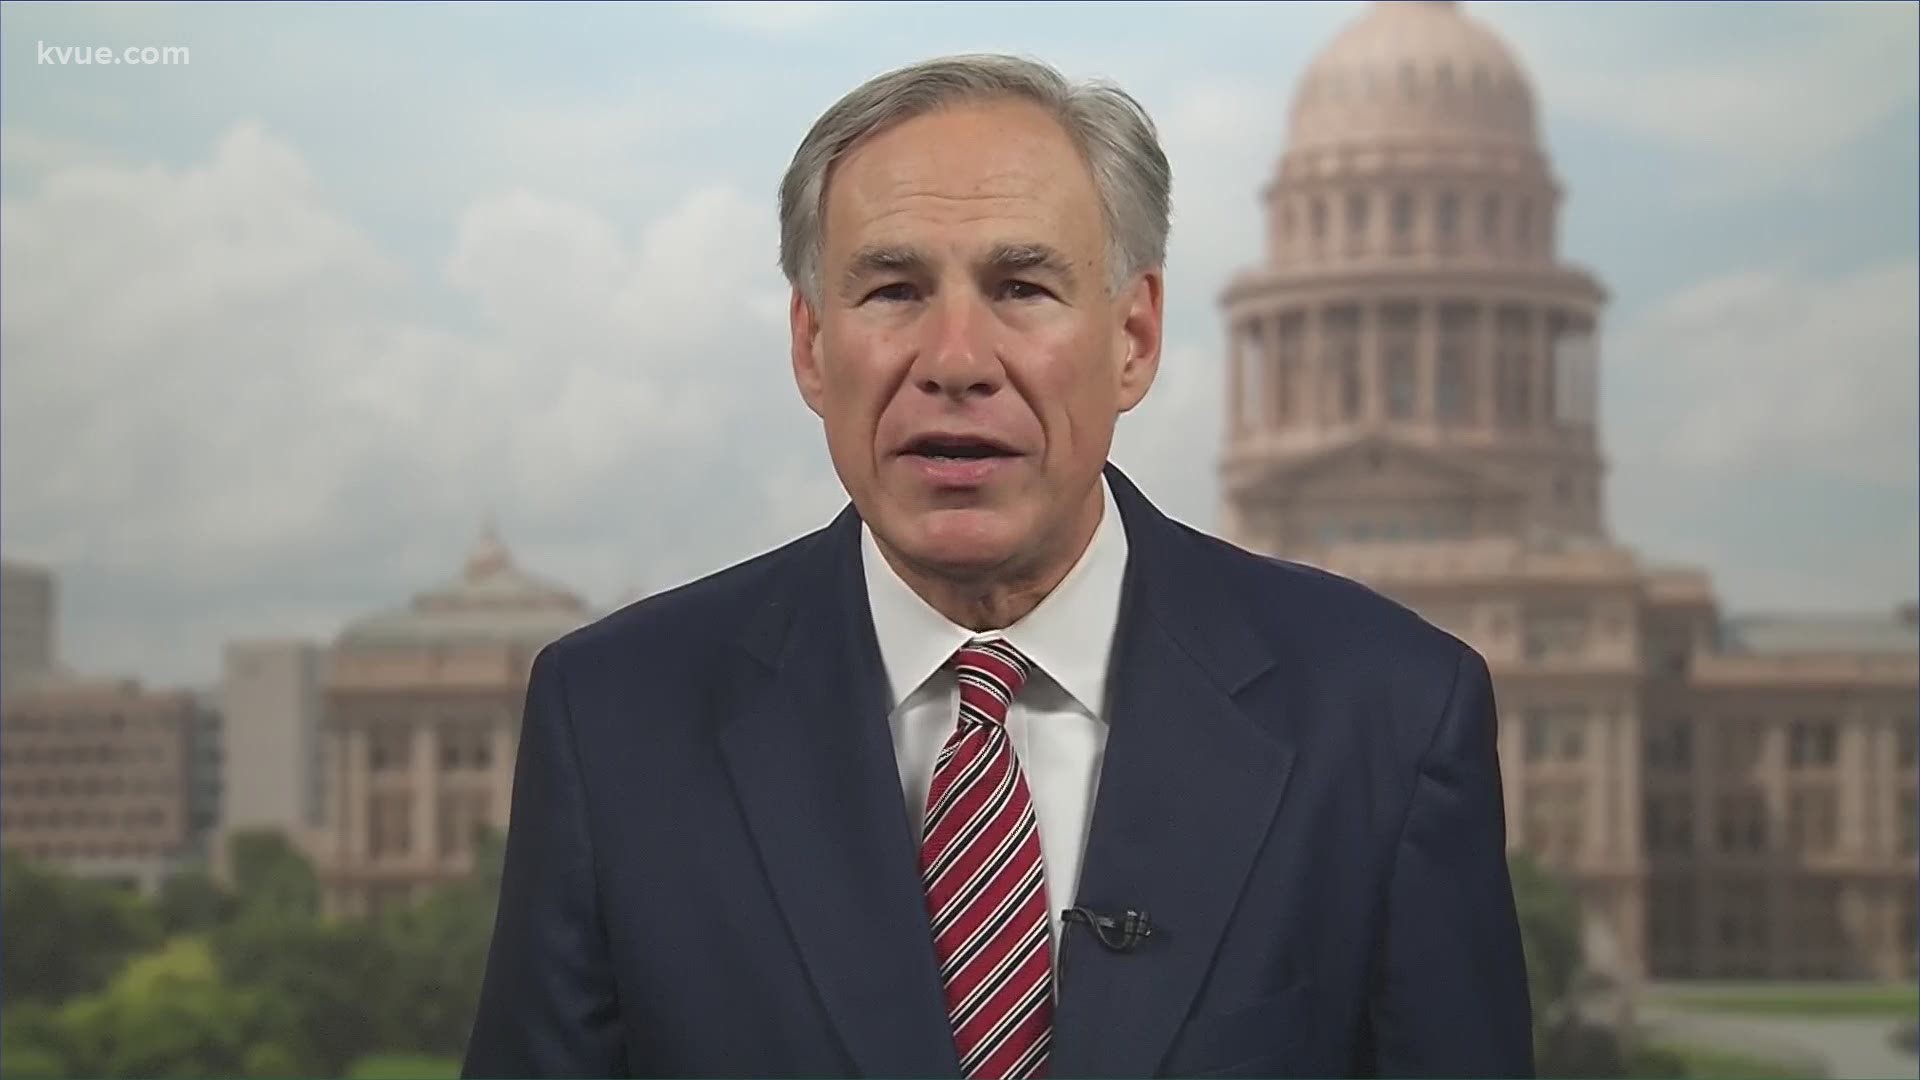 On Friday morning, Gov. Abbott declared that bars will need to re-close and restaurants should scale back to 50% capacity or less.